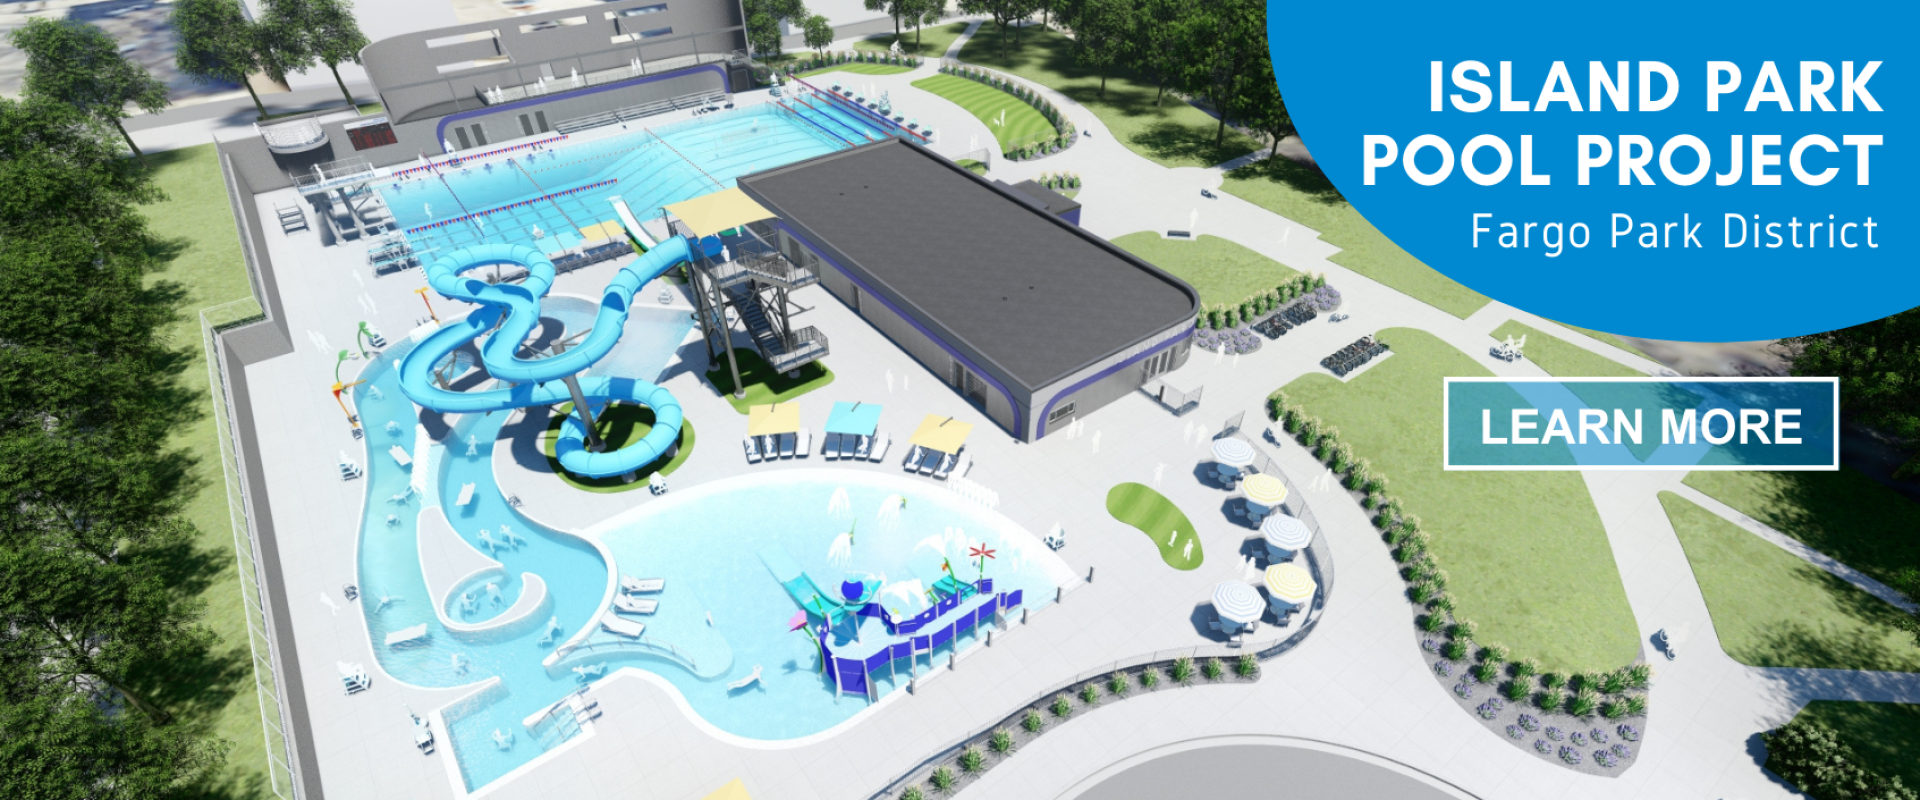 This photo shows a rendition of the new Island Park Pool with pool, slides and a lazy river